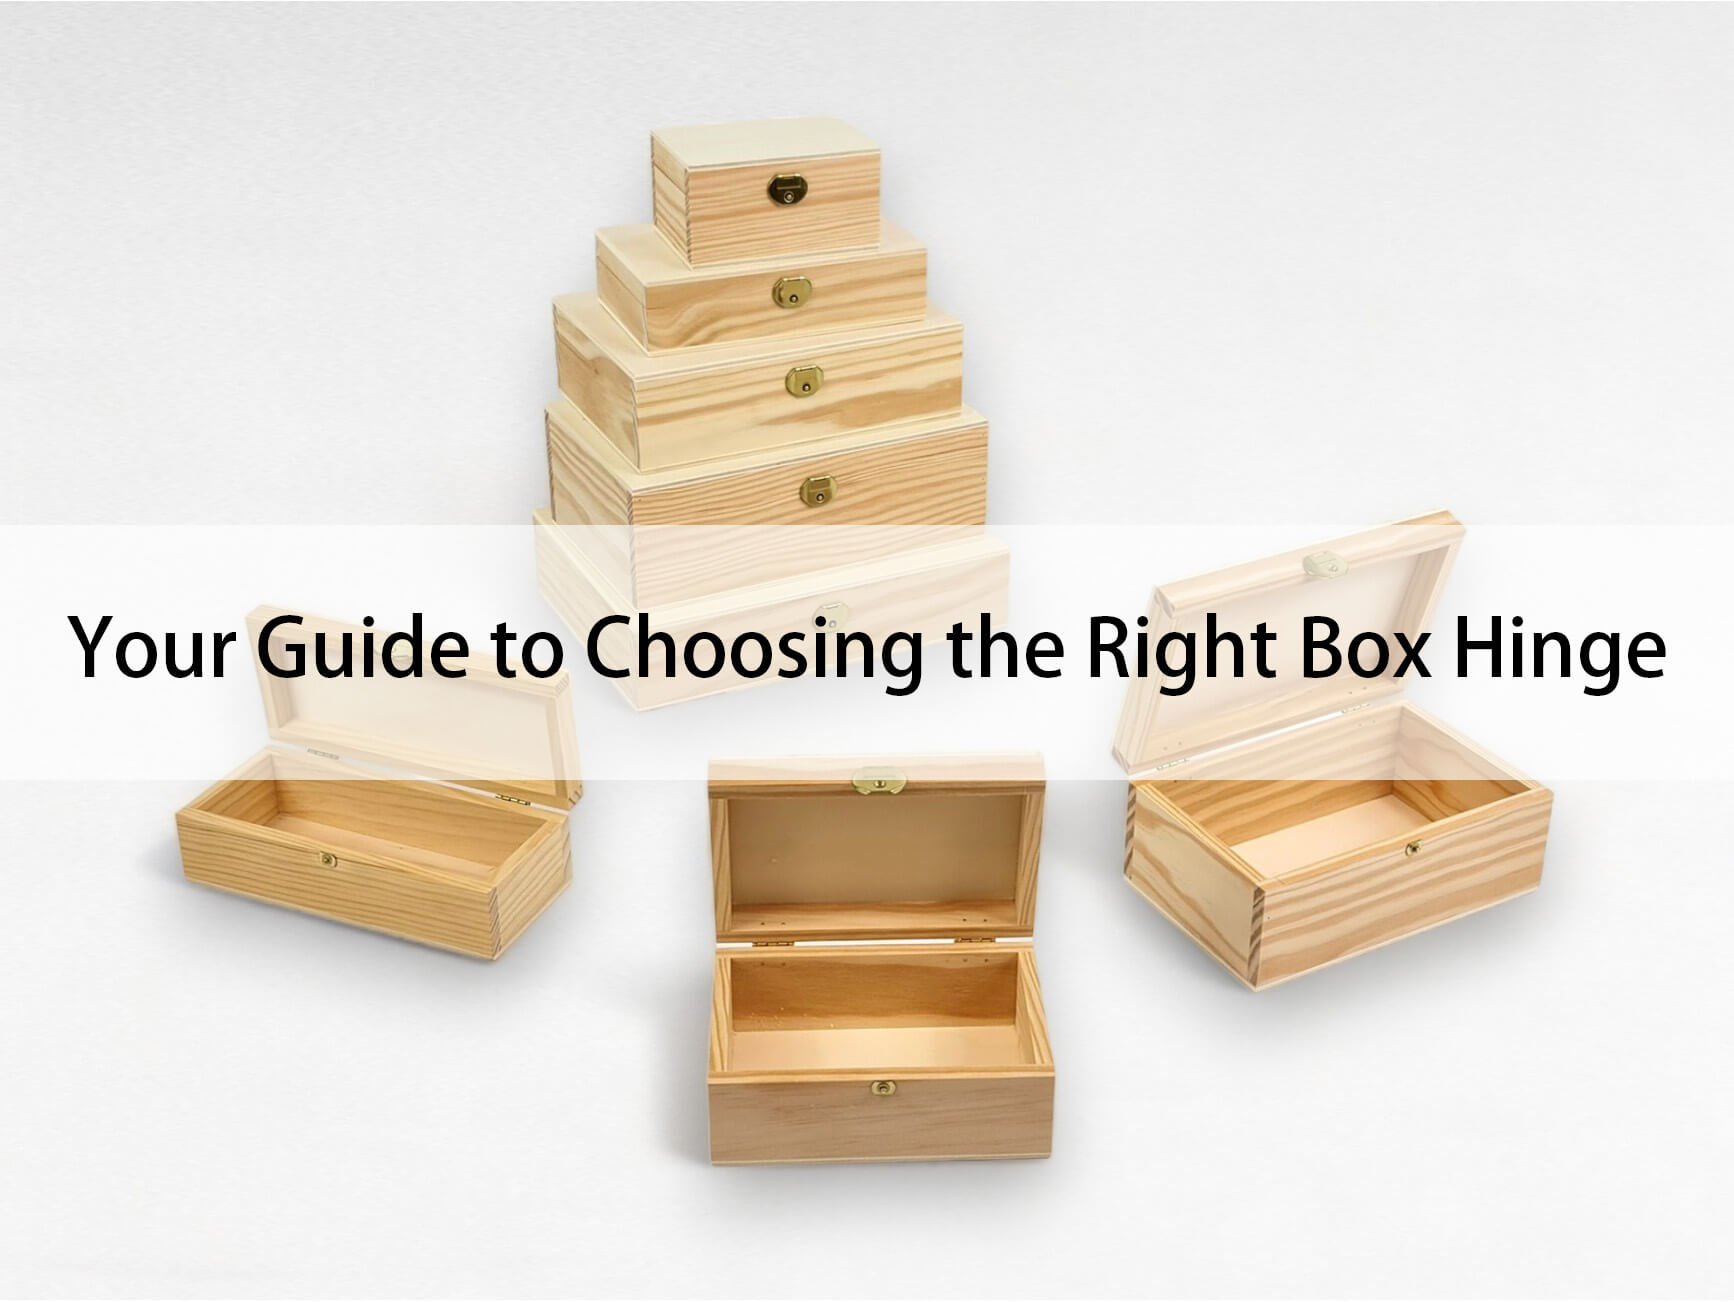 Your Guide to Choosing the Right Box Hinge